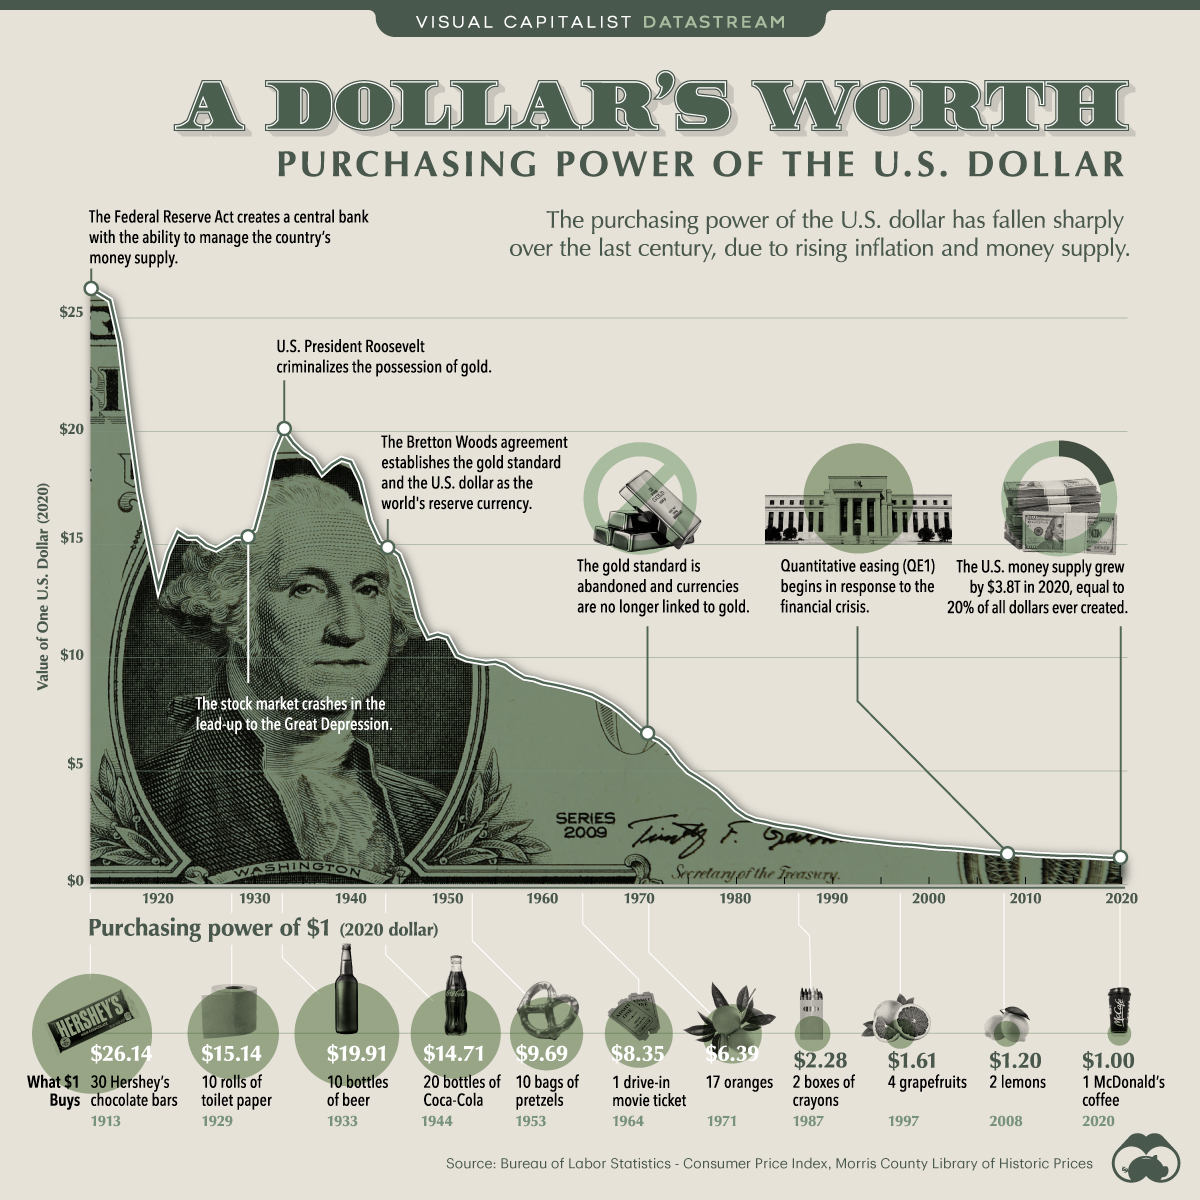 Purchasing Power of the U.S. Dollar Over Time Investment Watch